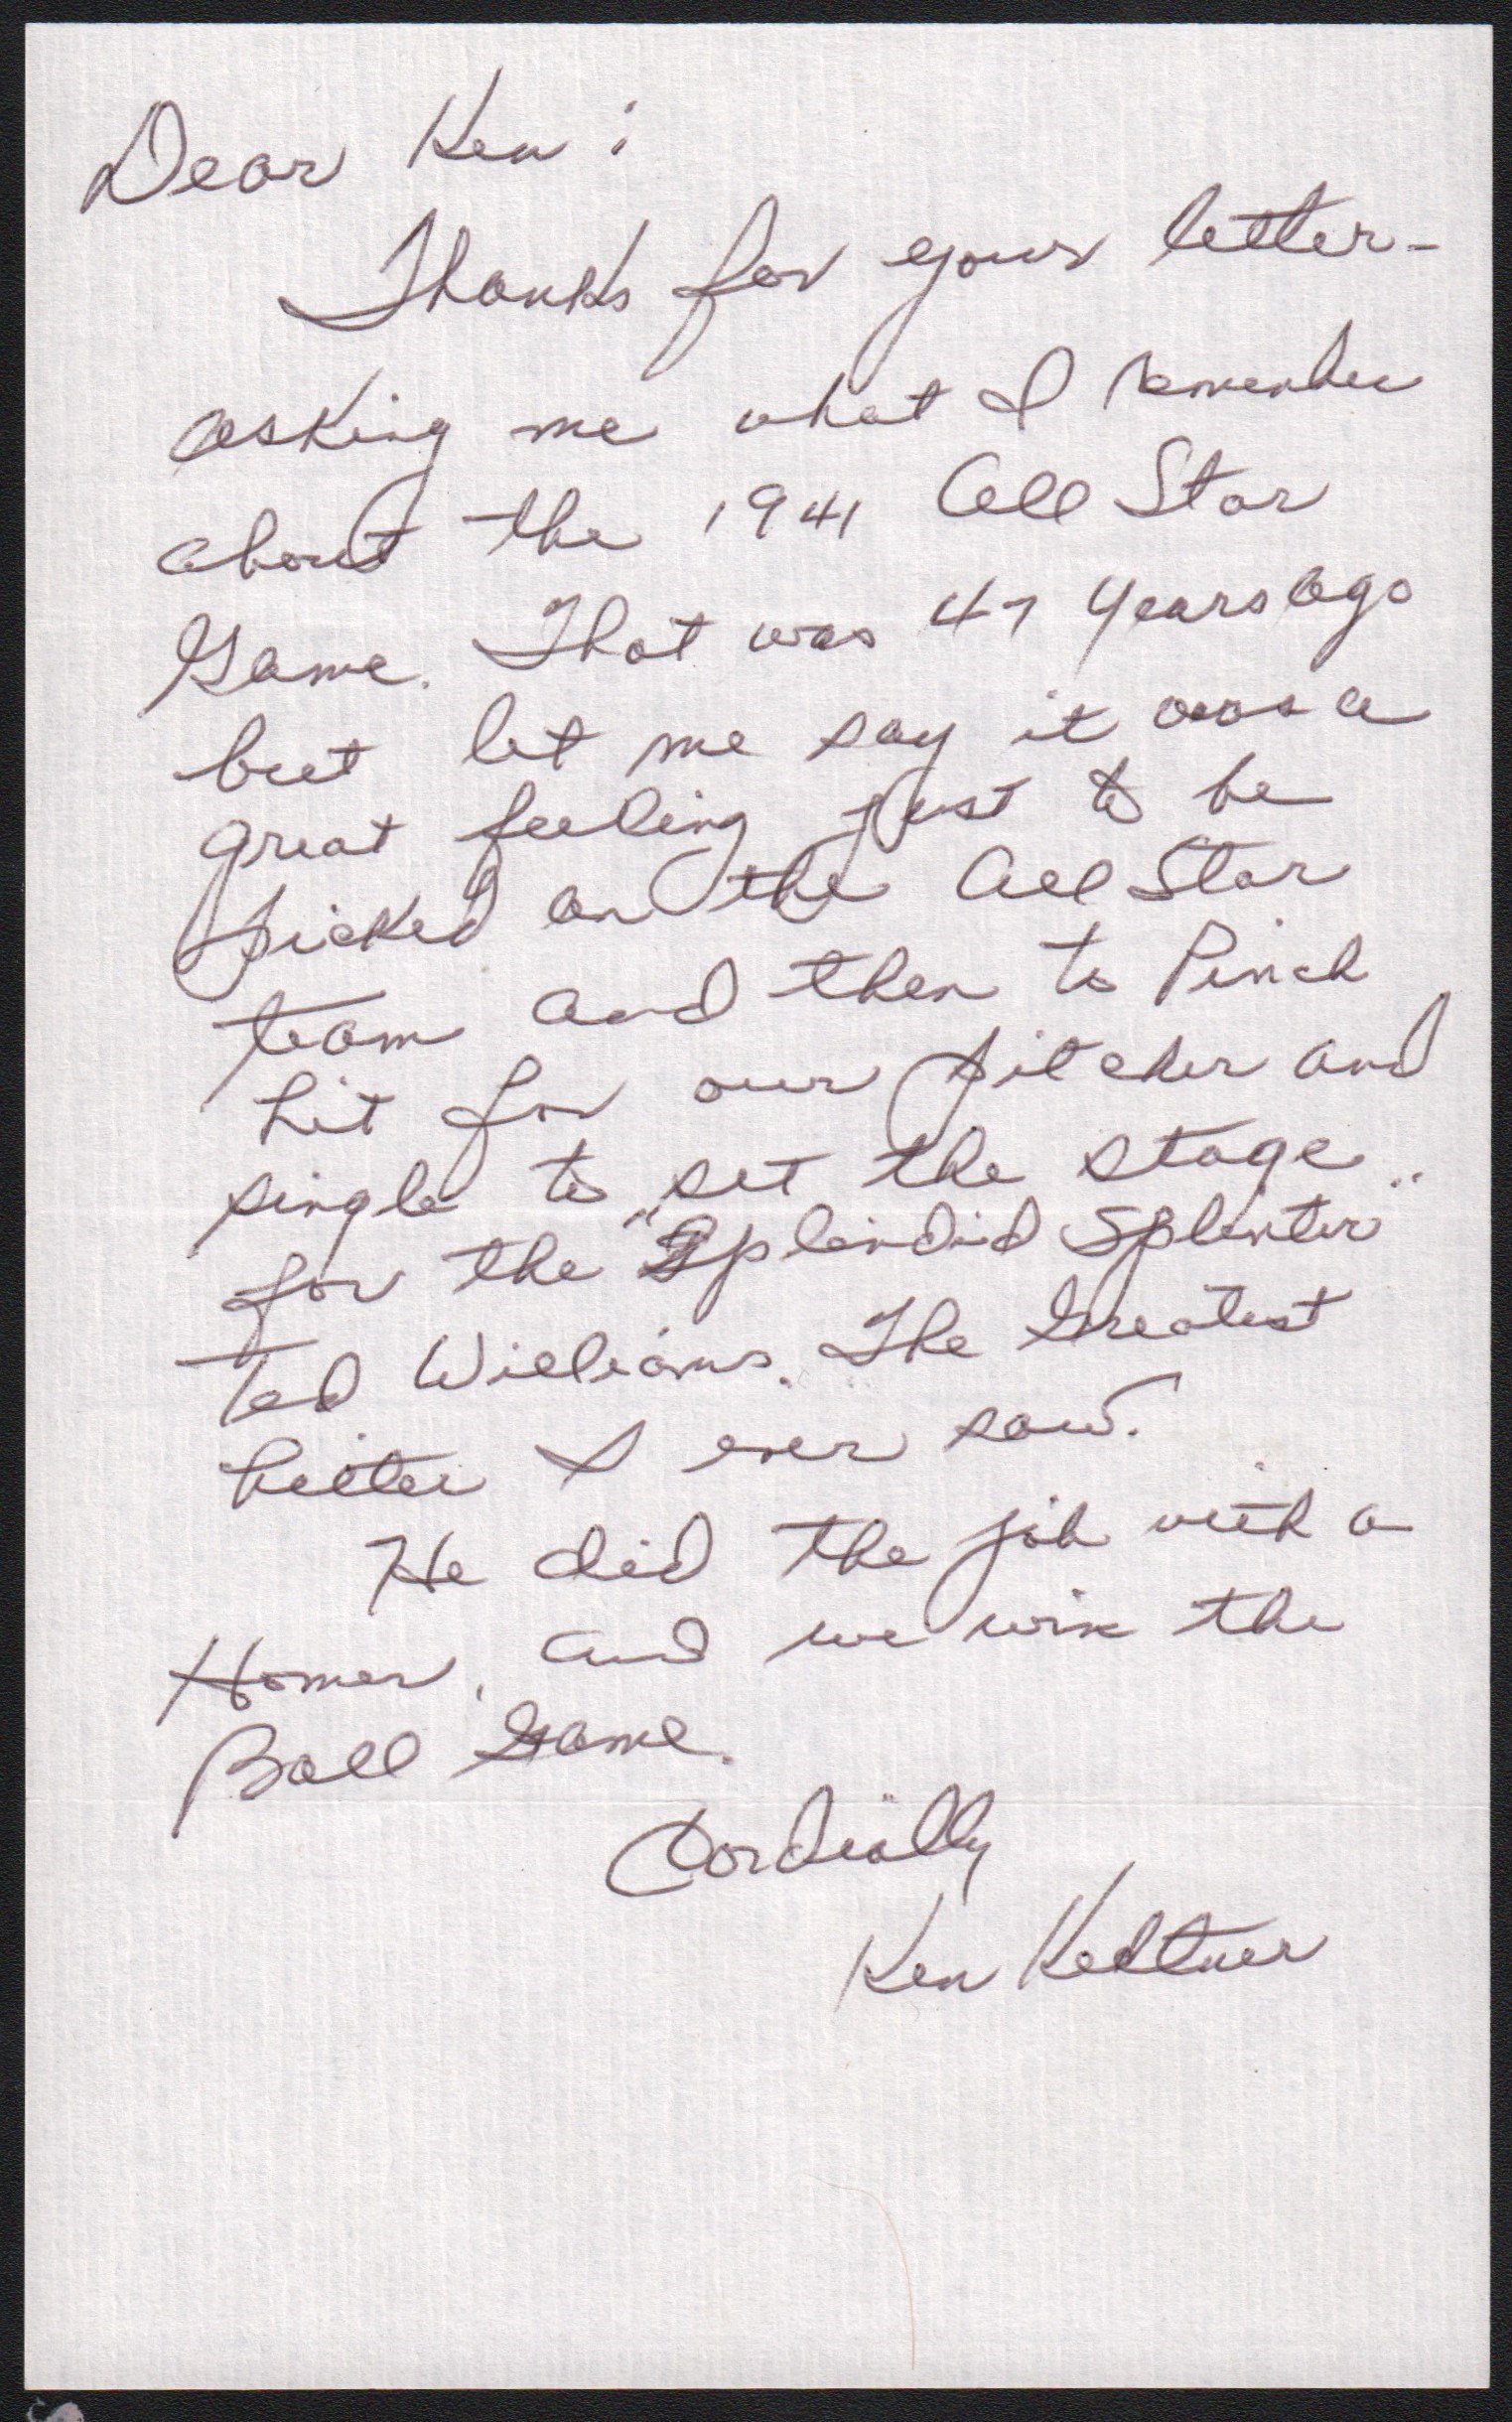 - Ken Keltner Handwritten Letter with Ted Williams Famous 1941 All Star Game HR Content